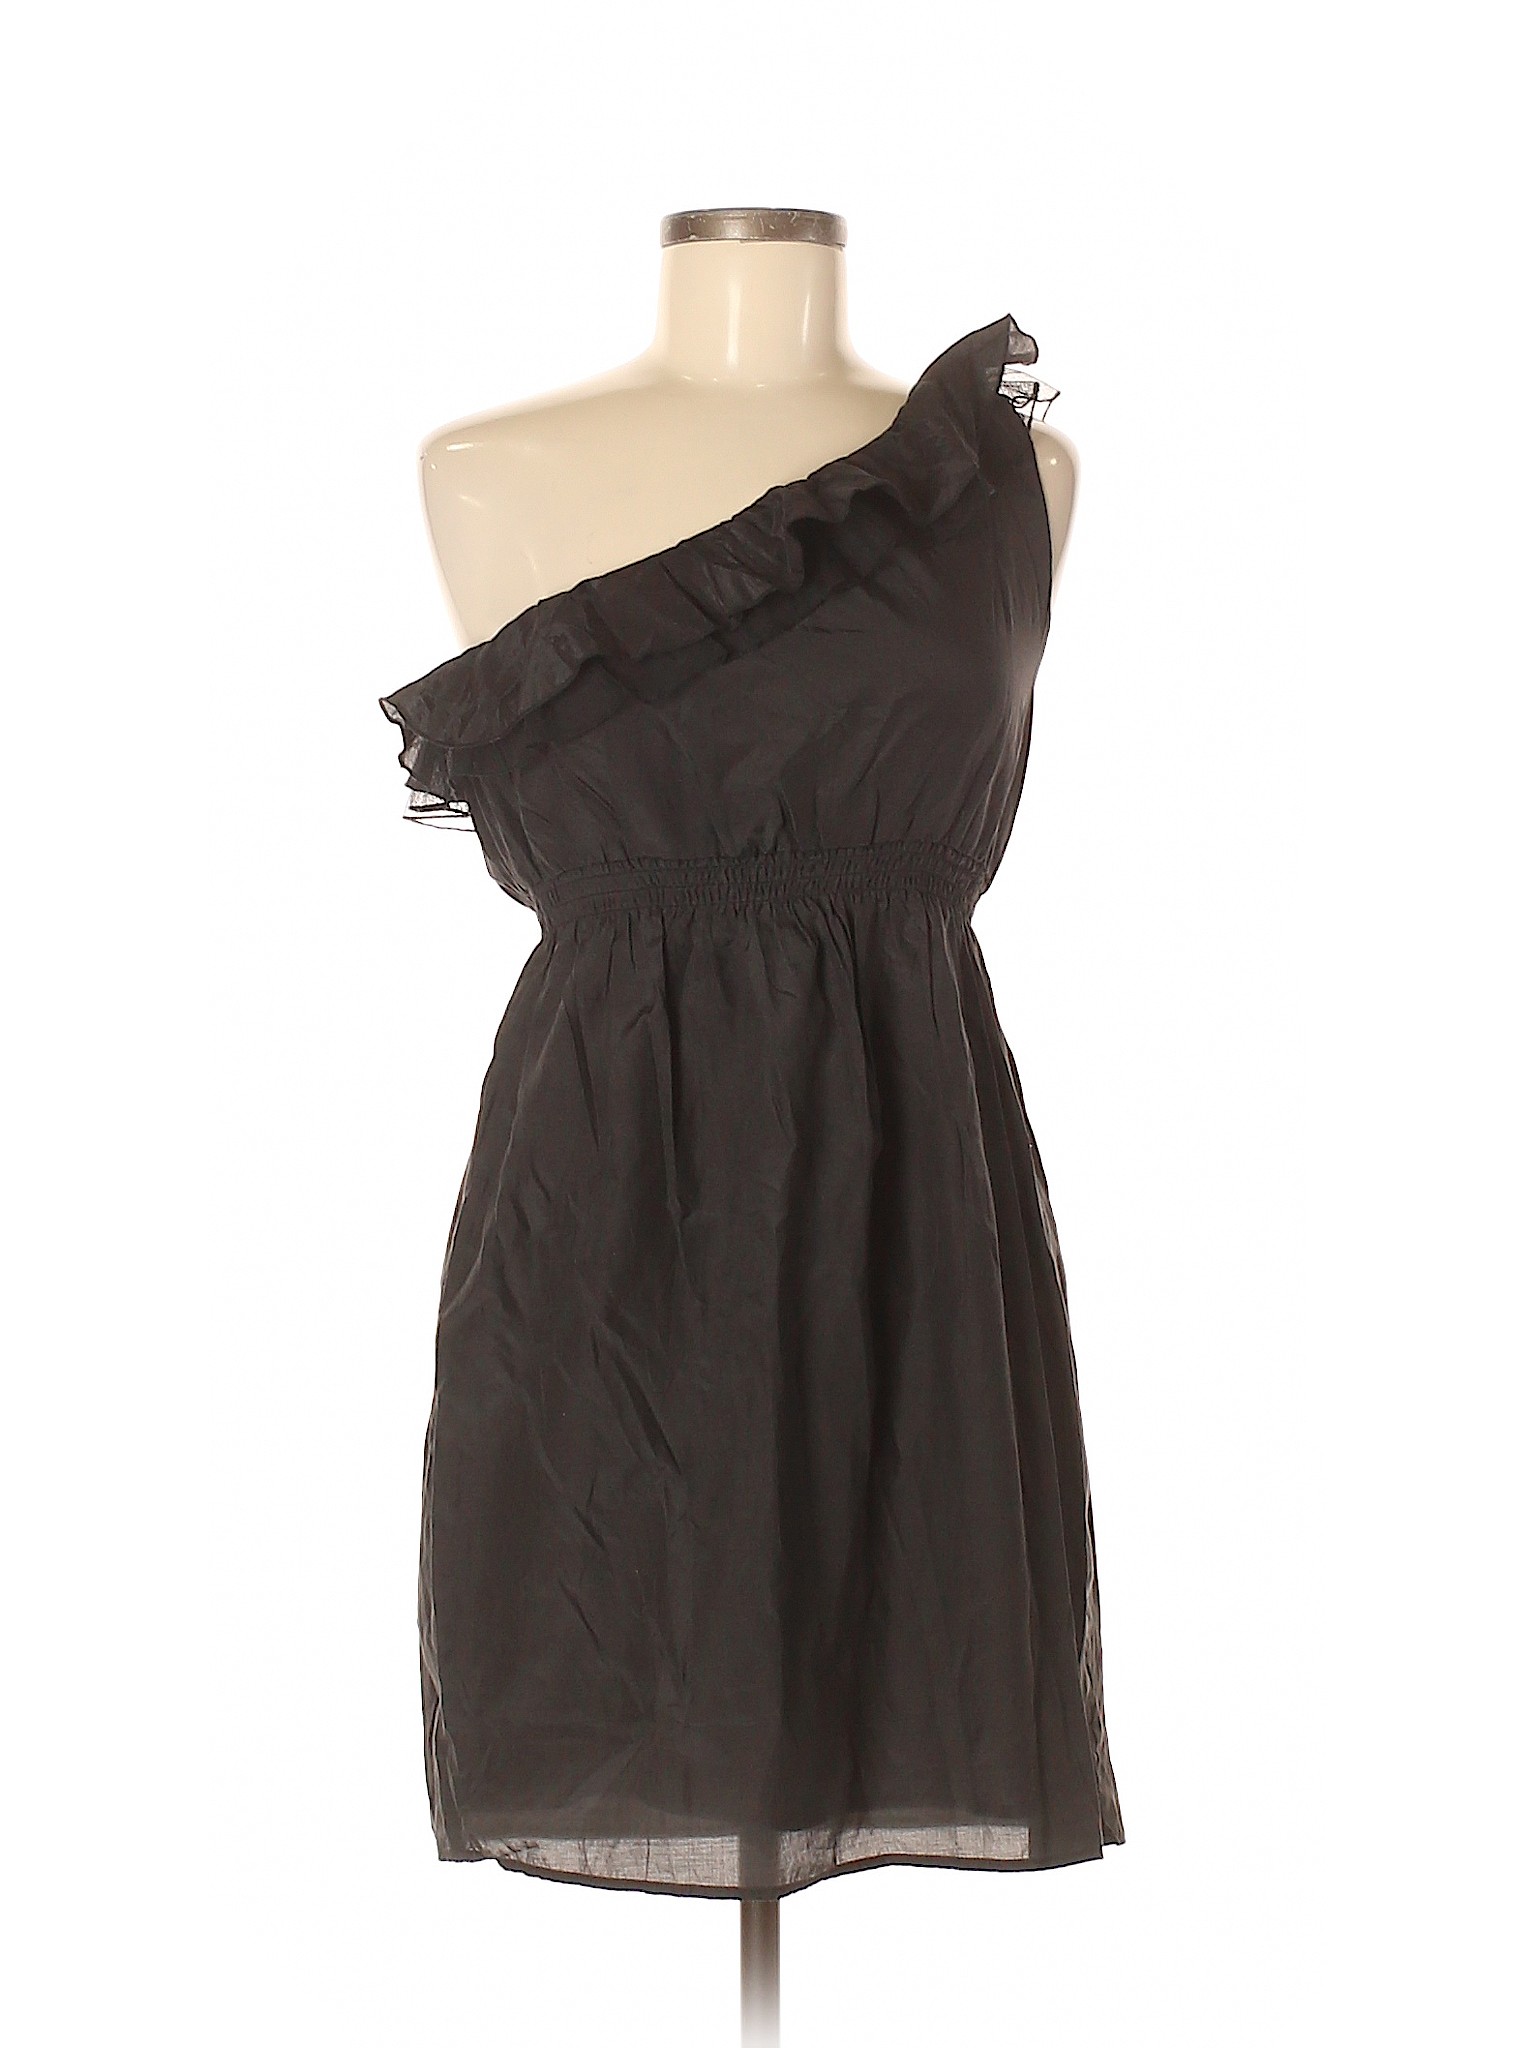 Poetry Clothing Solid Black Cocktail Dress Size M - 95% off | thredUP